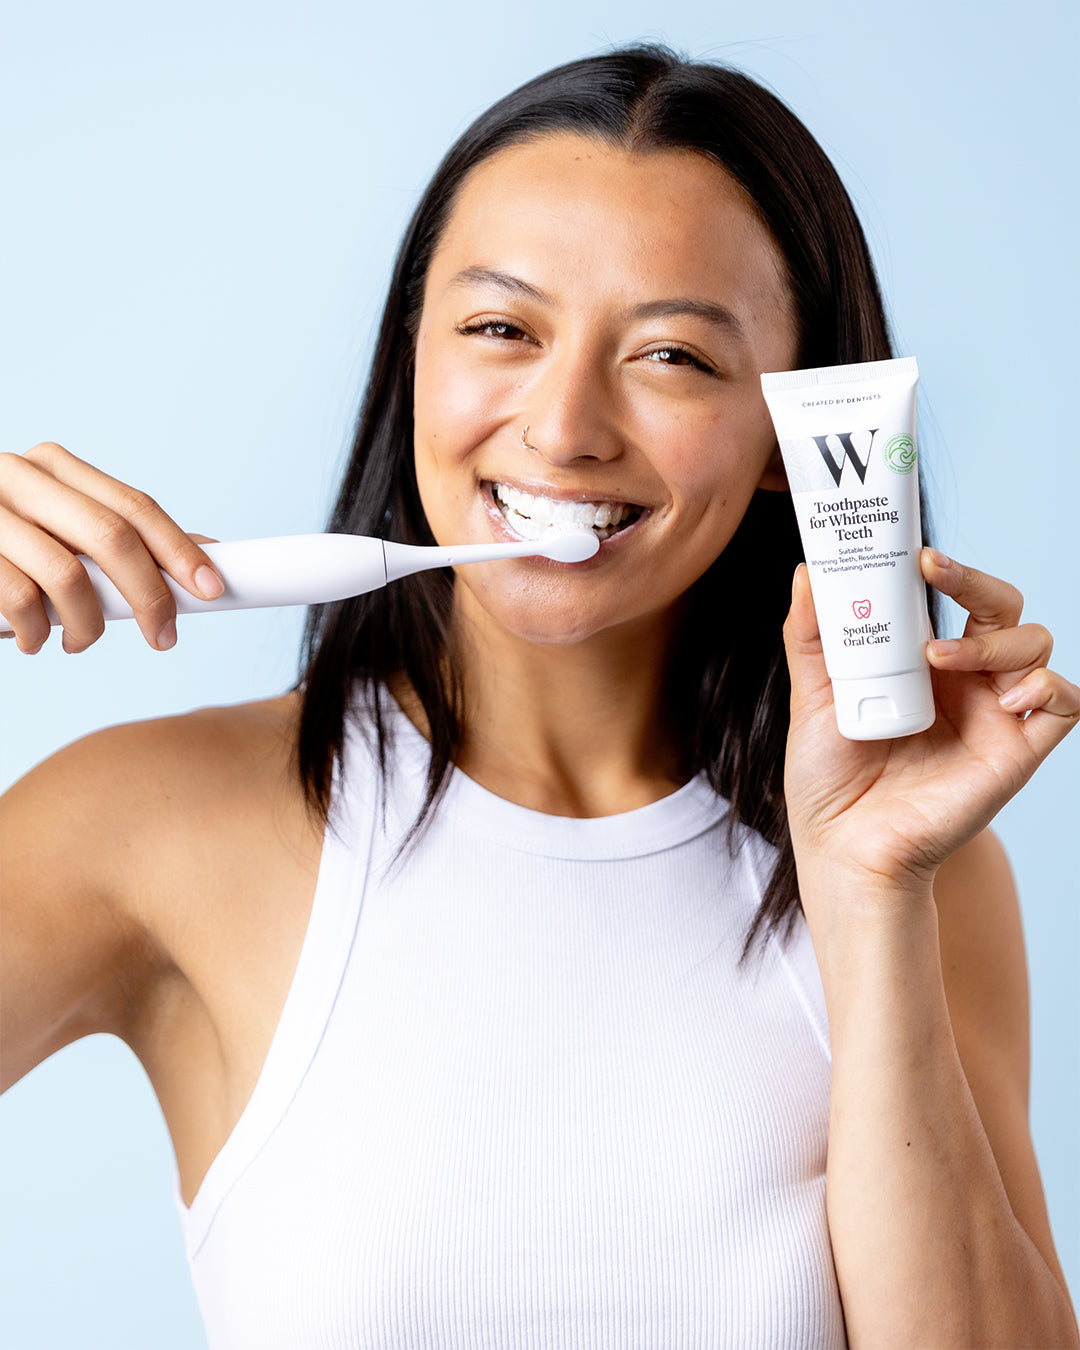 Toothpaste for Whitening Teeth X3 Bundle